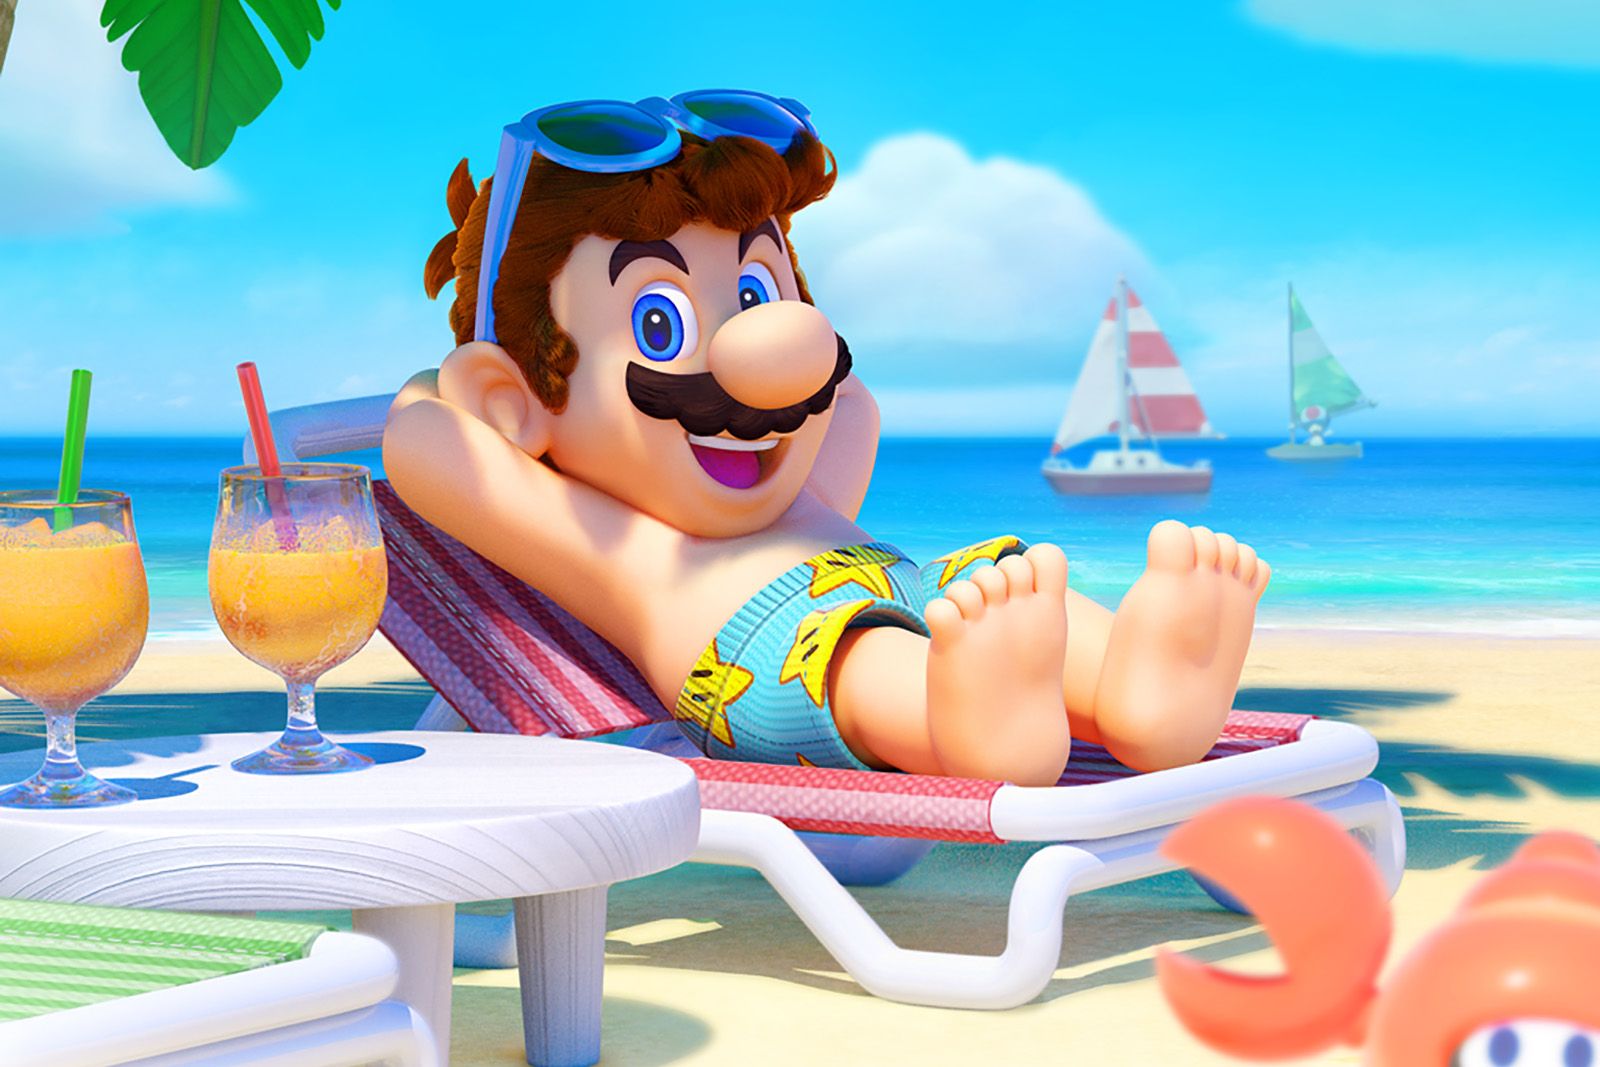 Does Mario sunbathing pic mean Mario Sunshine for Switch is near? photo 1